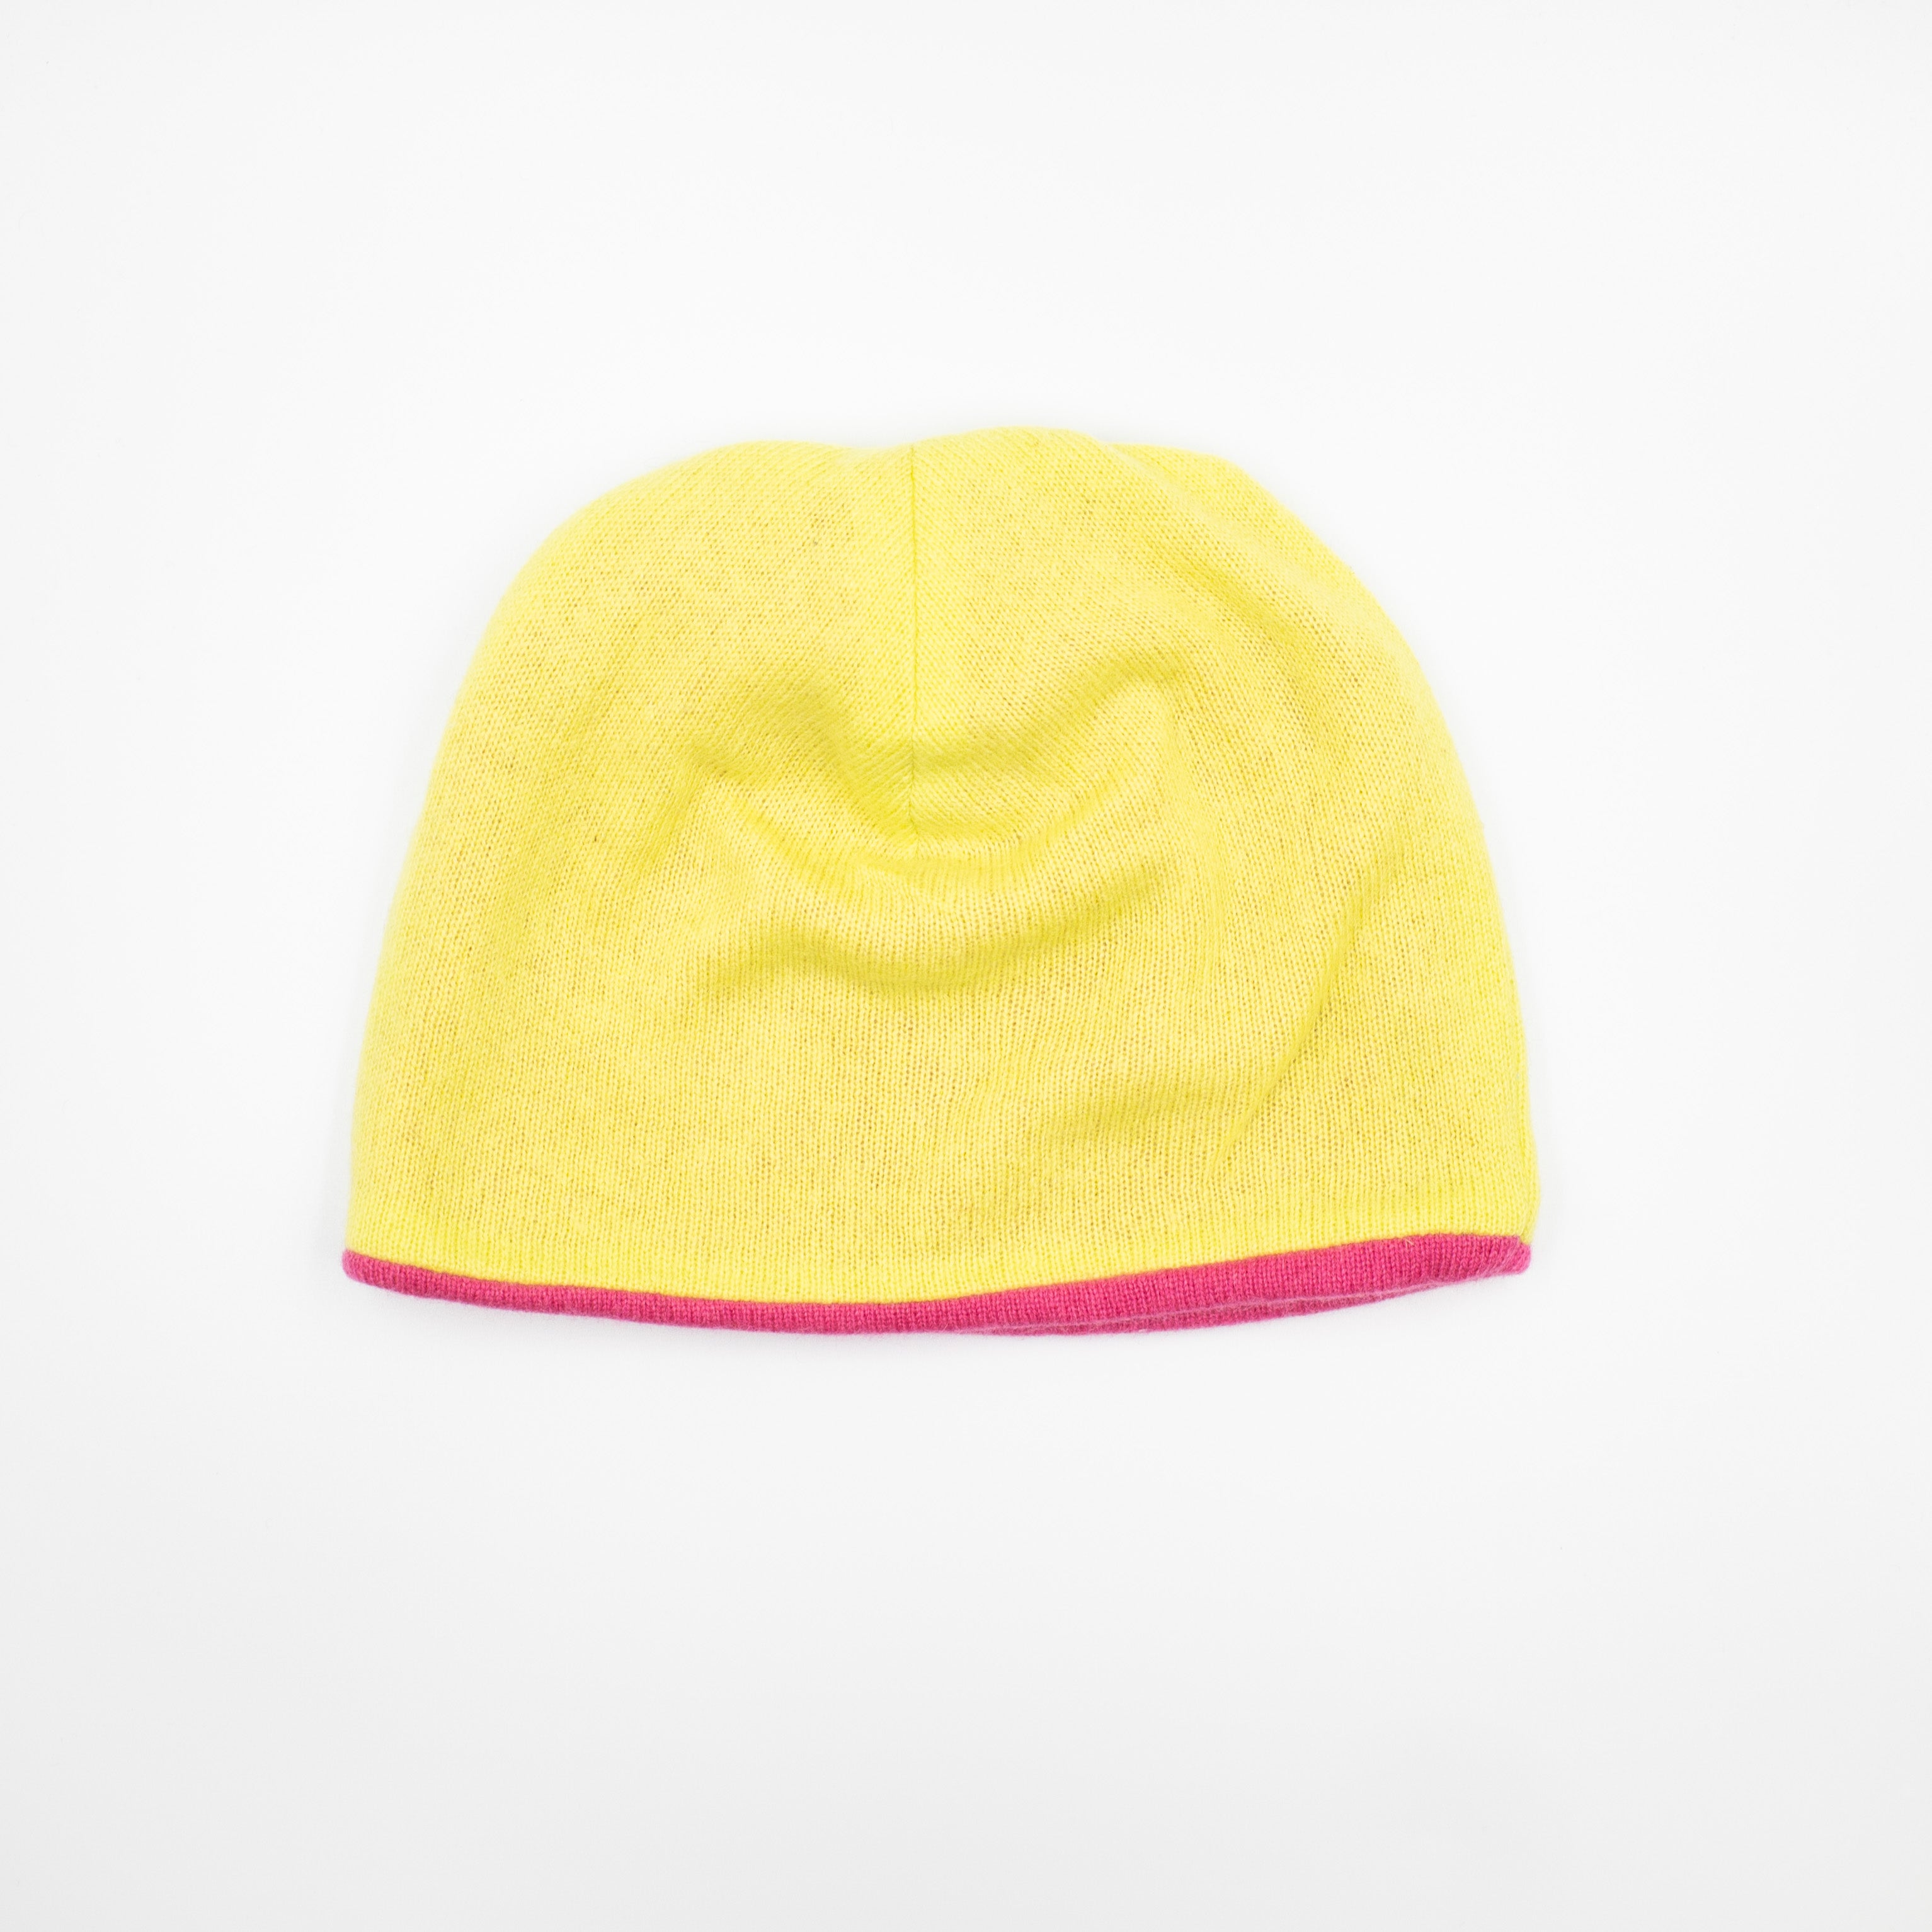 Neon Yellow and Hot Pink Beanie Hat